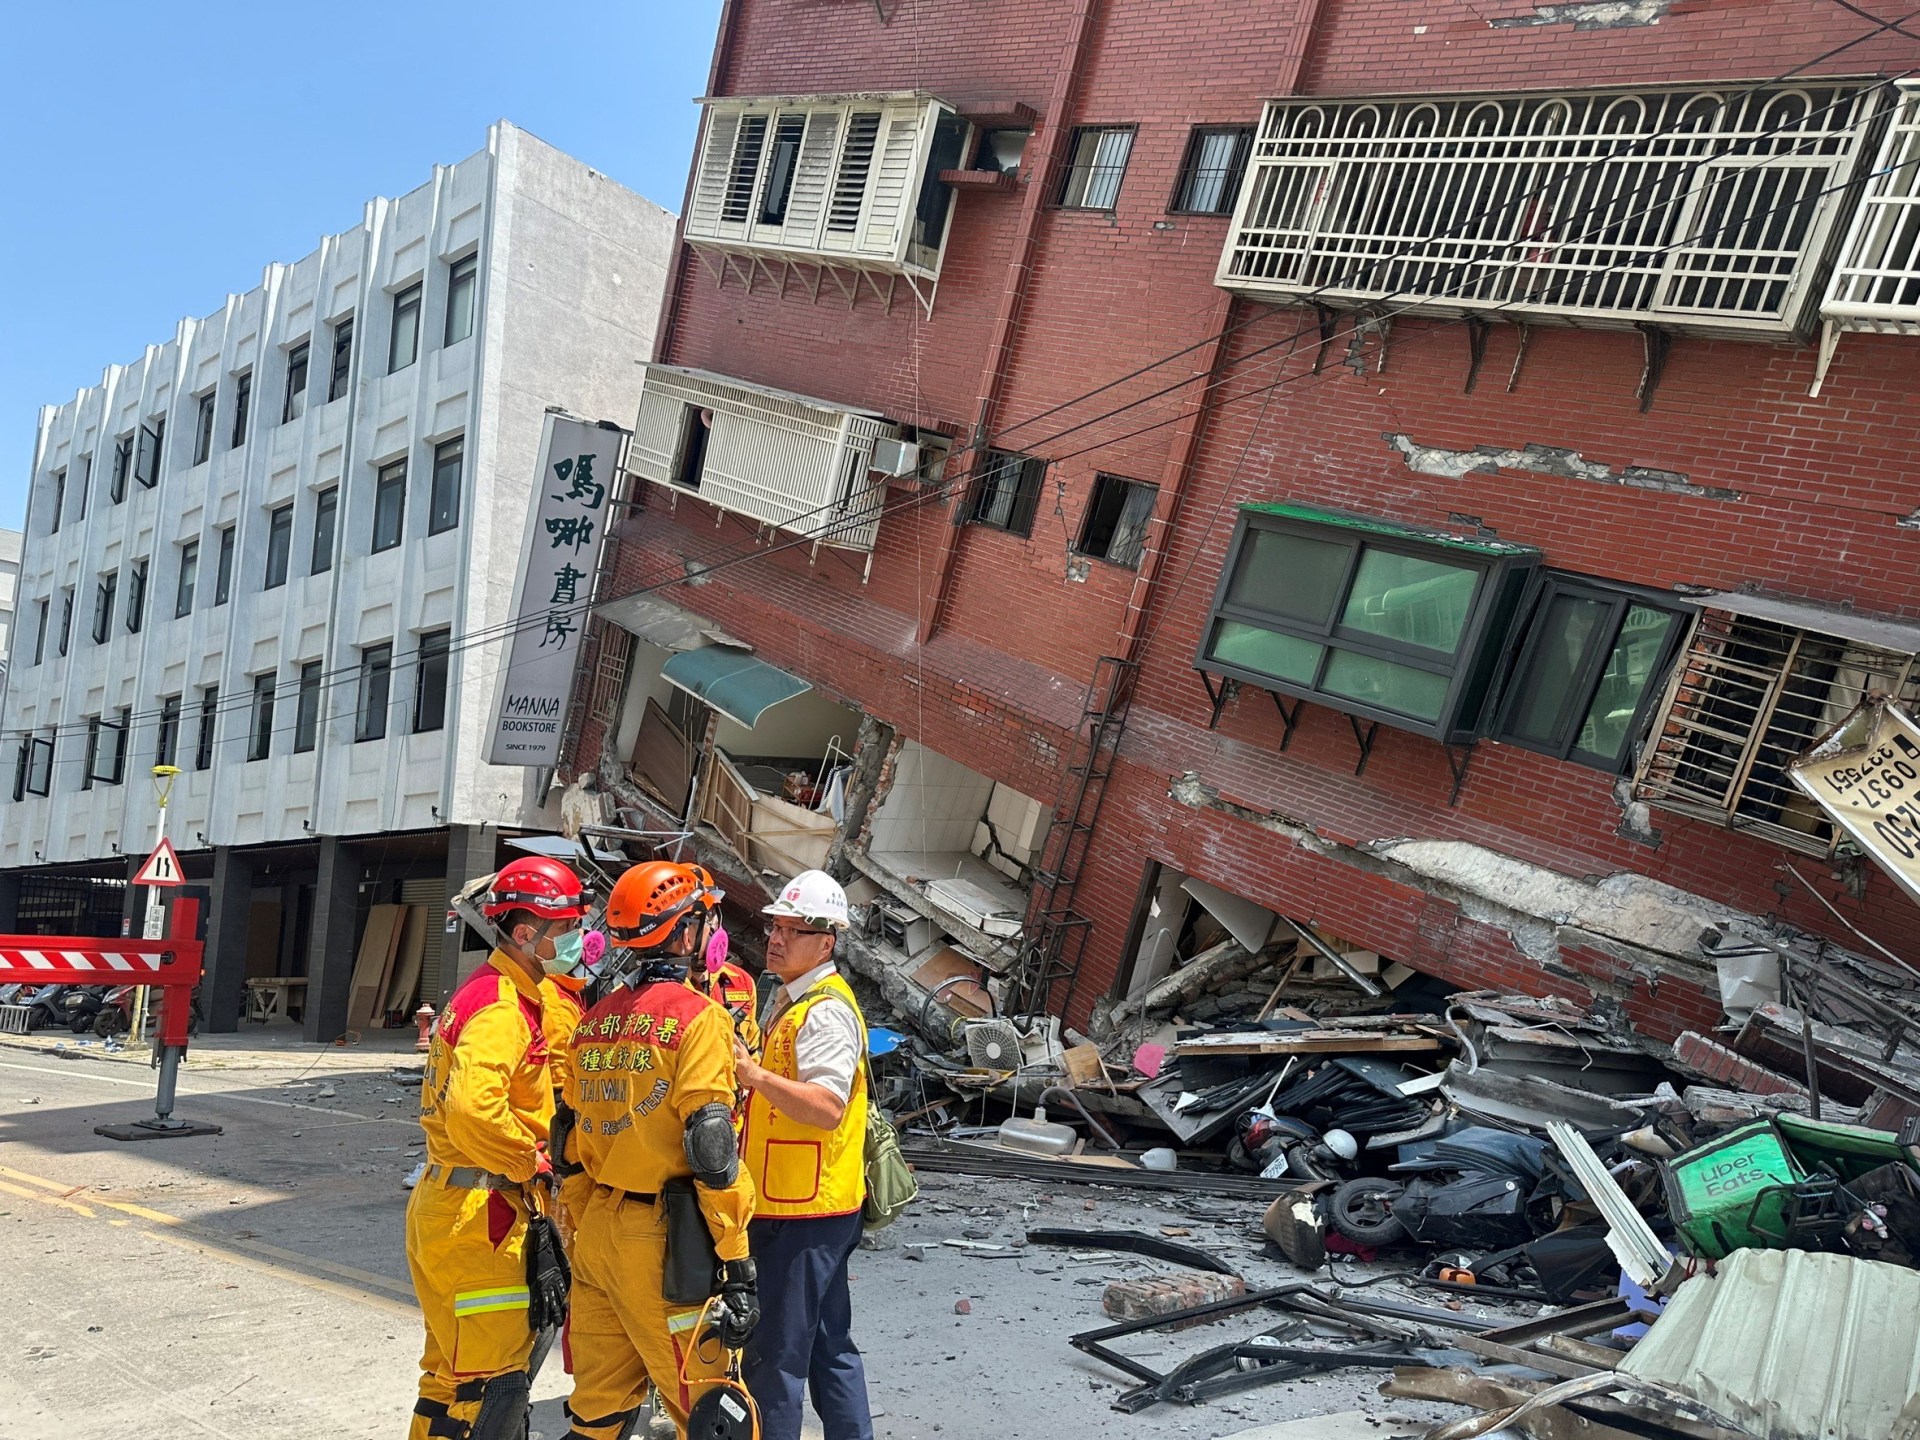 Deadly earthquake topples buildings in Taiwan